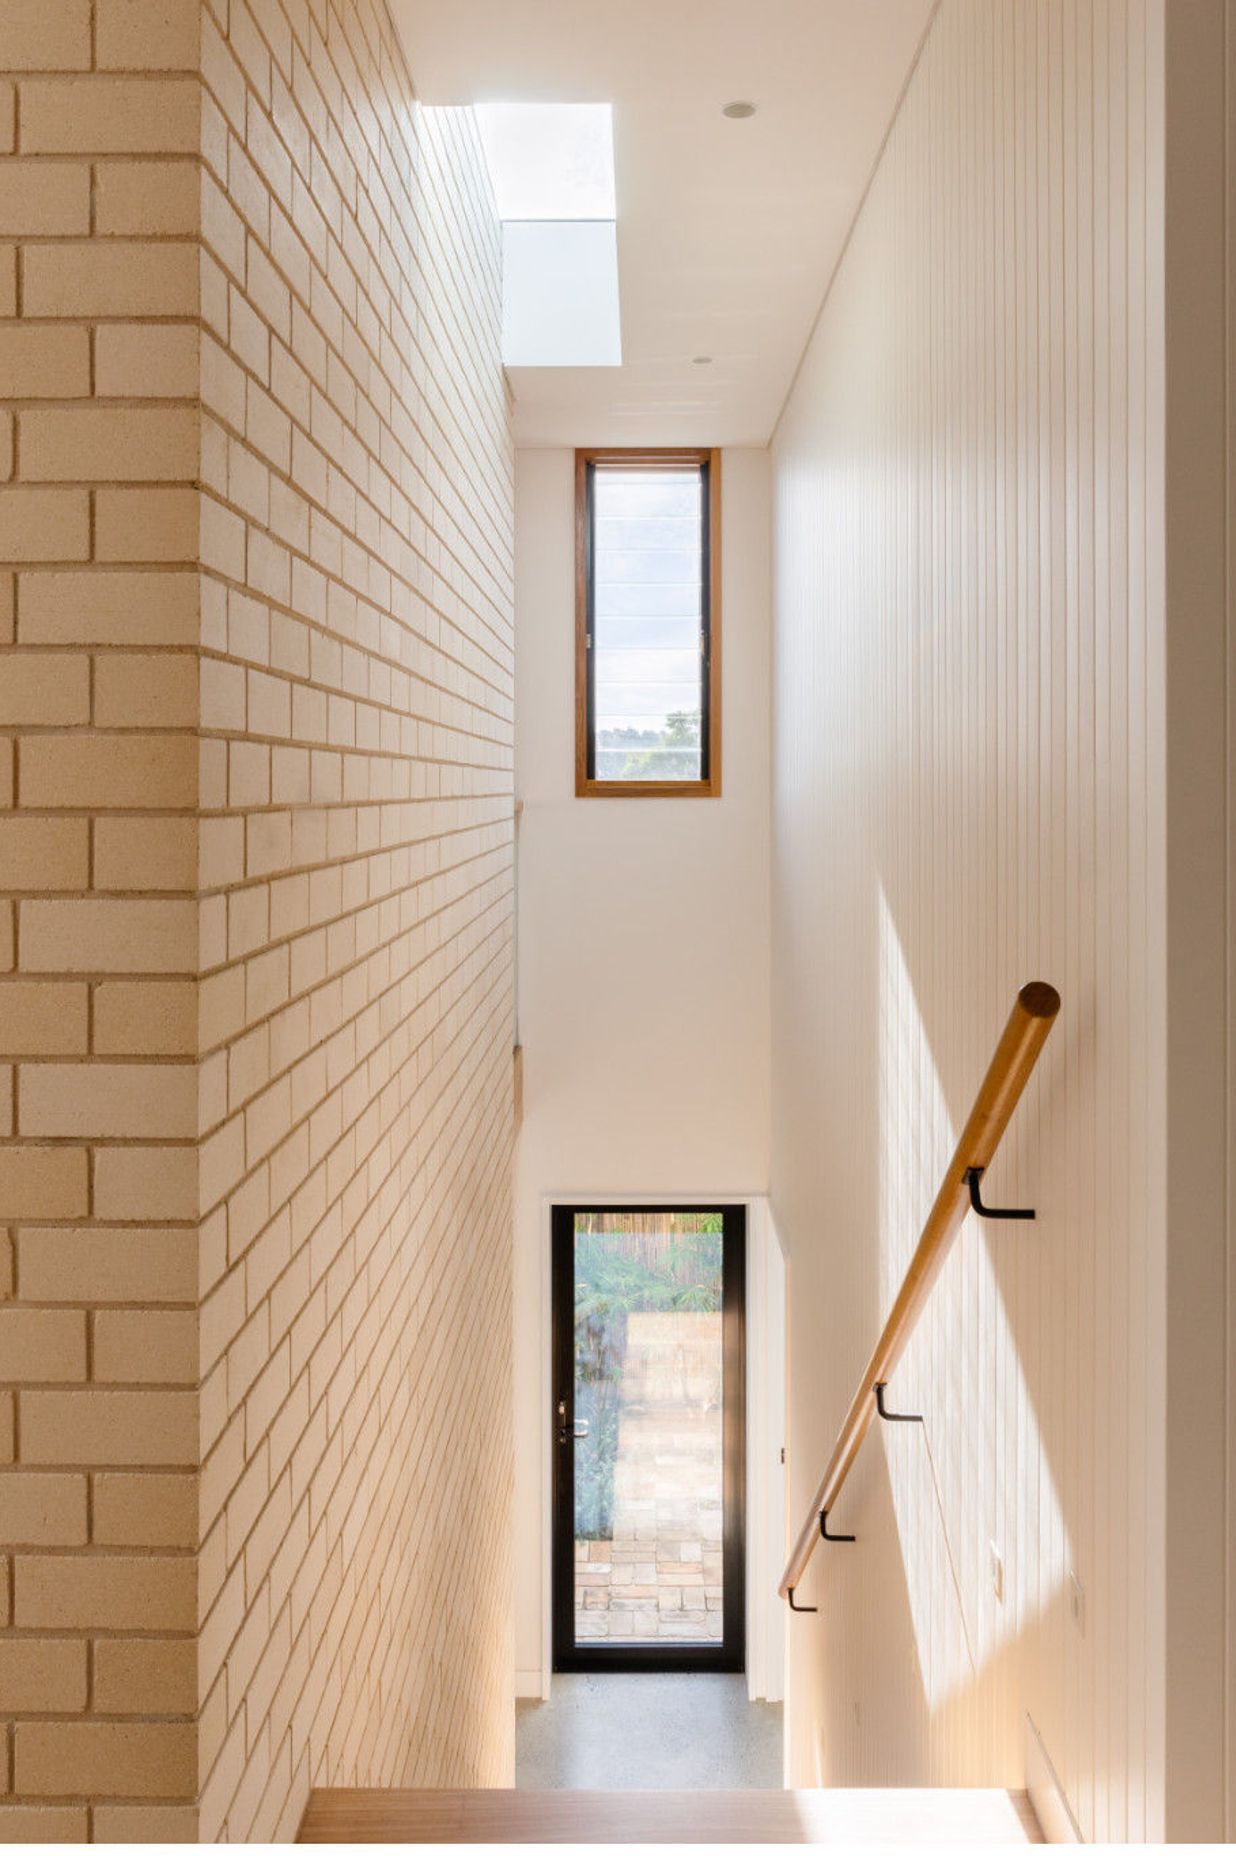 The light coloured bricks create a glow that is warm, yet gentle, and creates interest with texture.